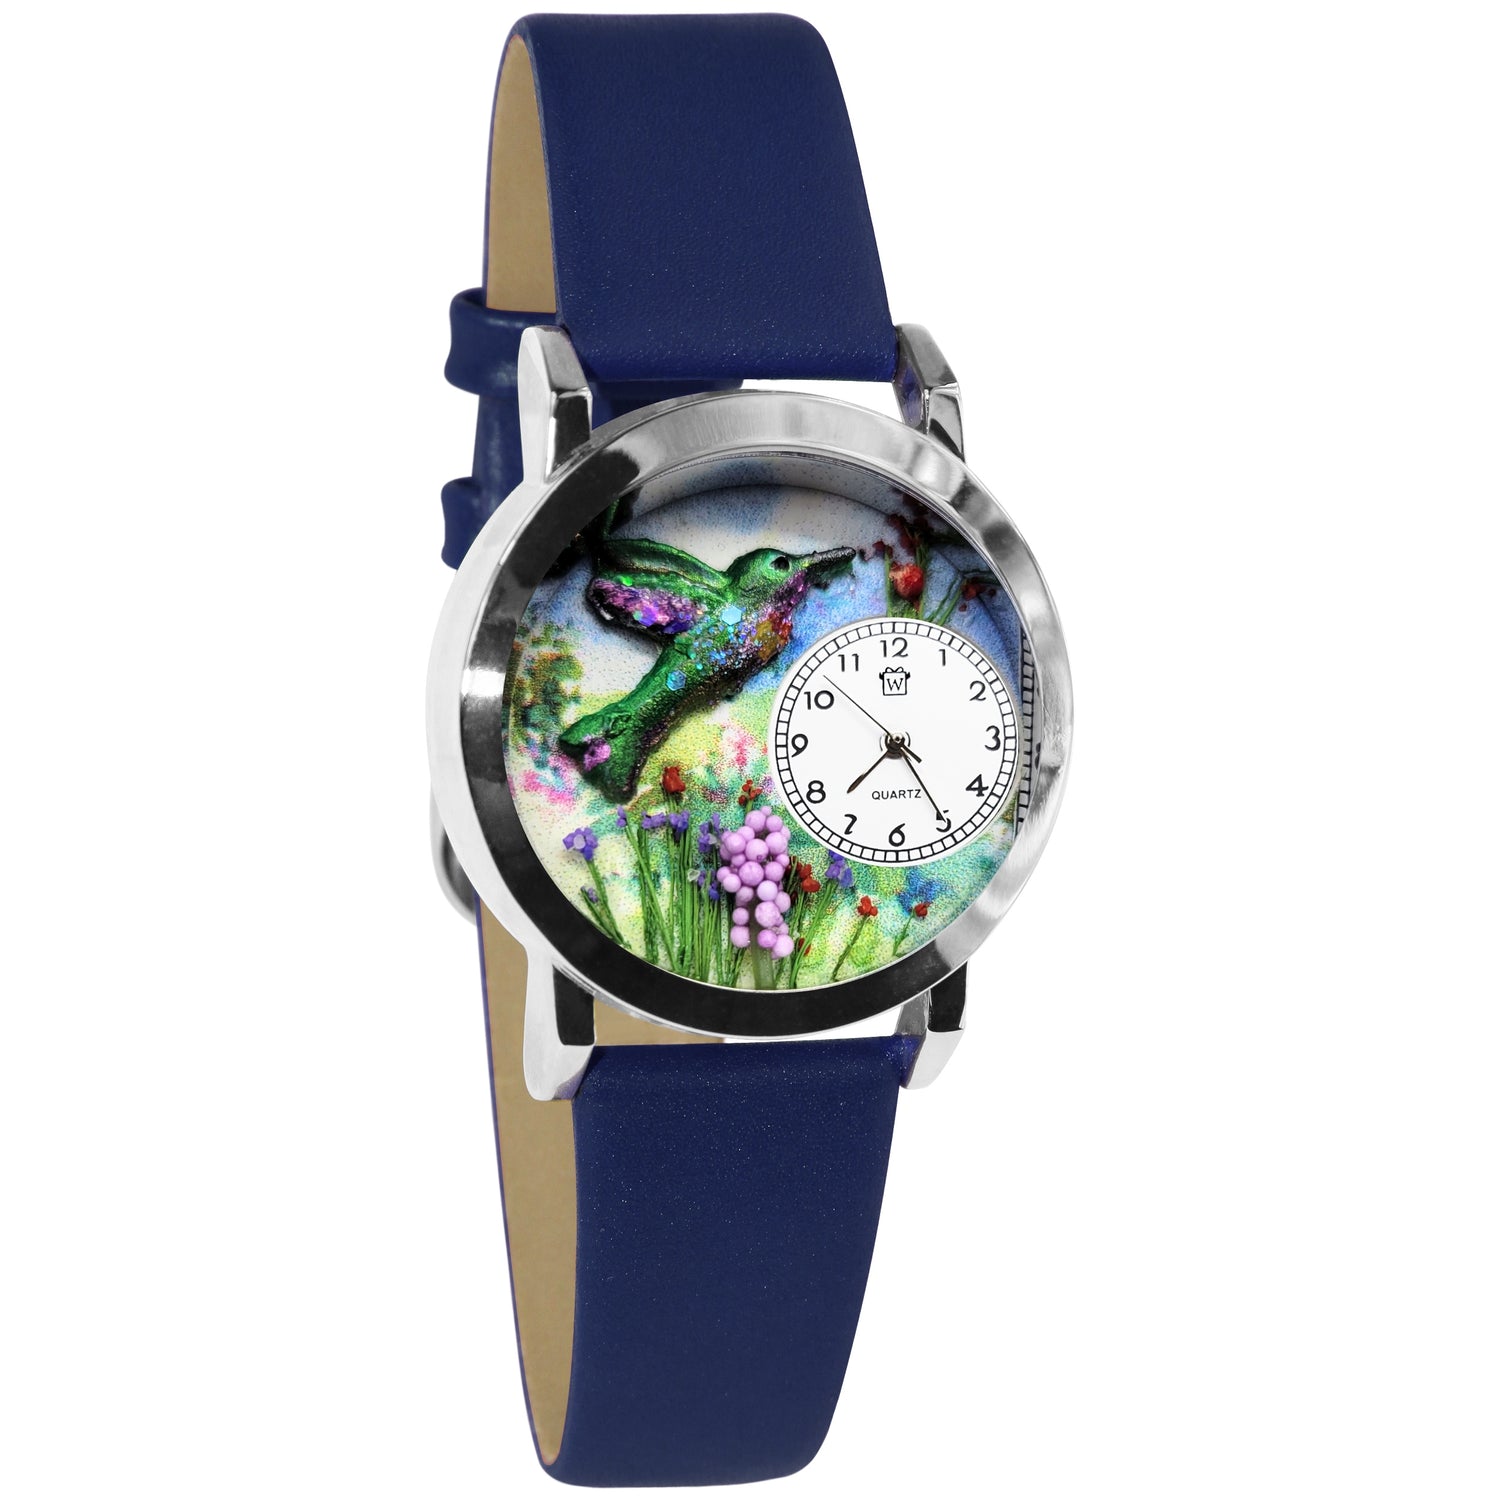 Whimsical Gifts | Hummingbirds 3D Watch Small Style | Handmade in USA | Animal Lover | Outdoor & Garden | Novelty Unique Fun Miniatures Gift | Silver Finish Navy Leather Watch Band